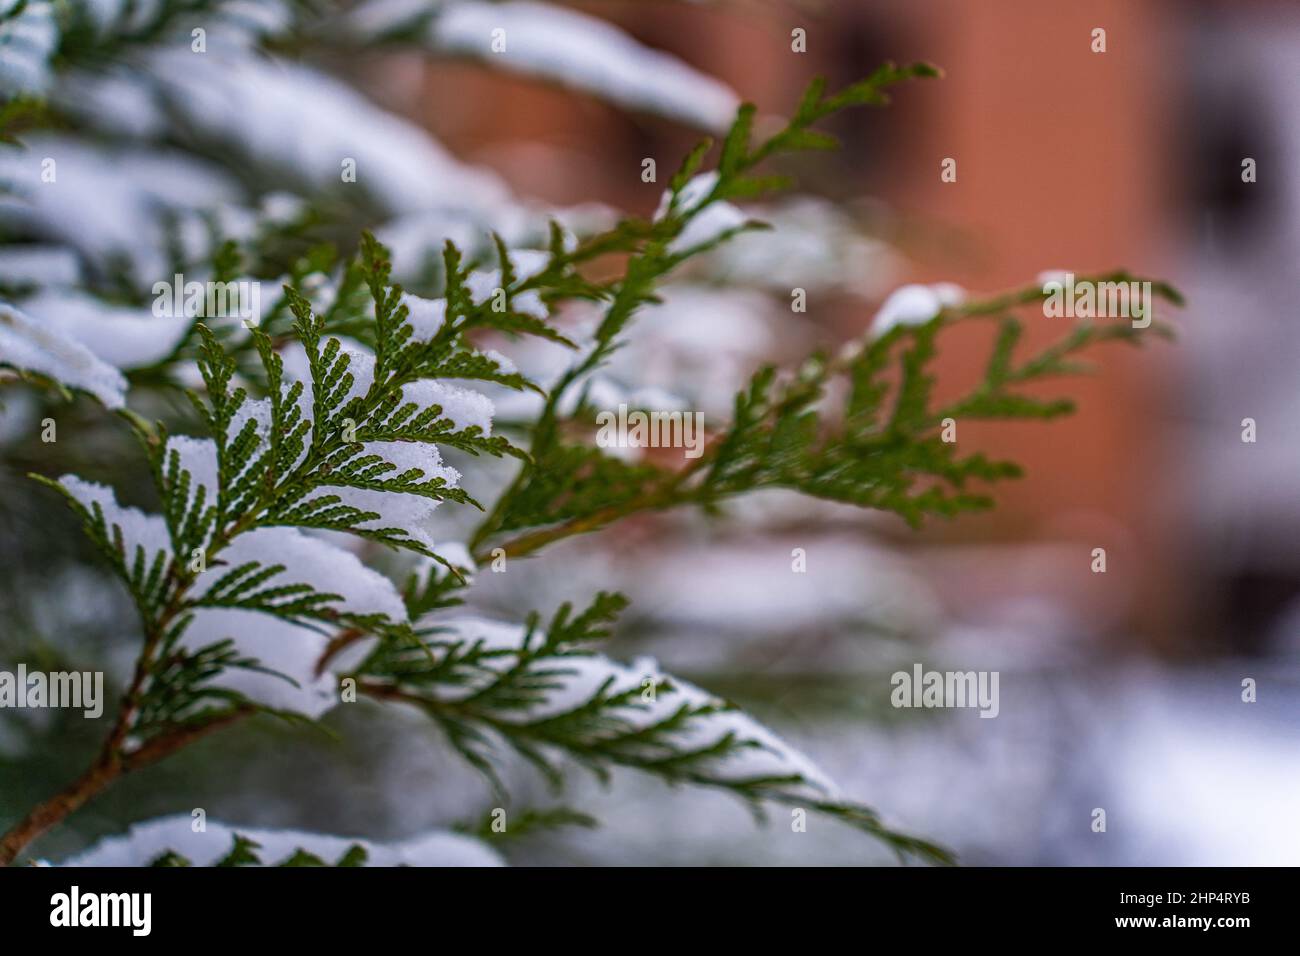 Focus in the foreground on a thuja branch covered in snow in winter, background blurred. Stock Photo